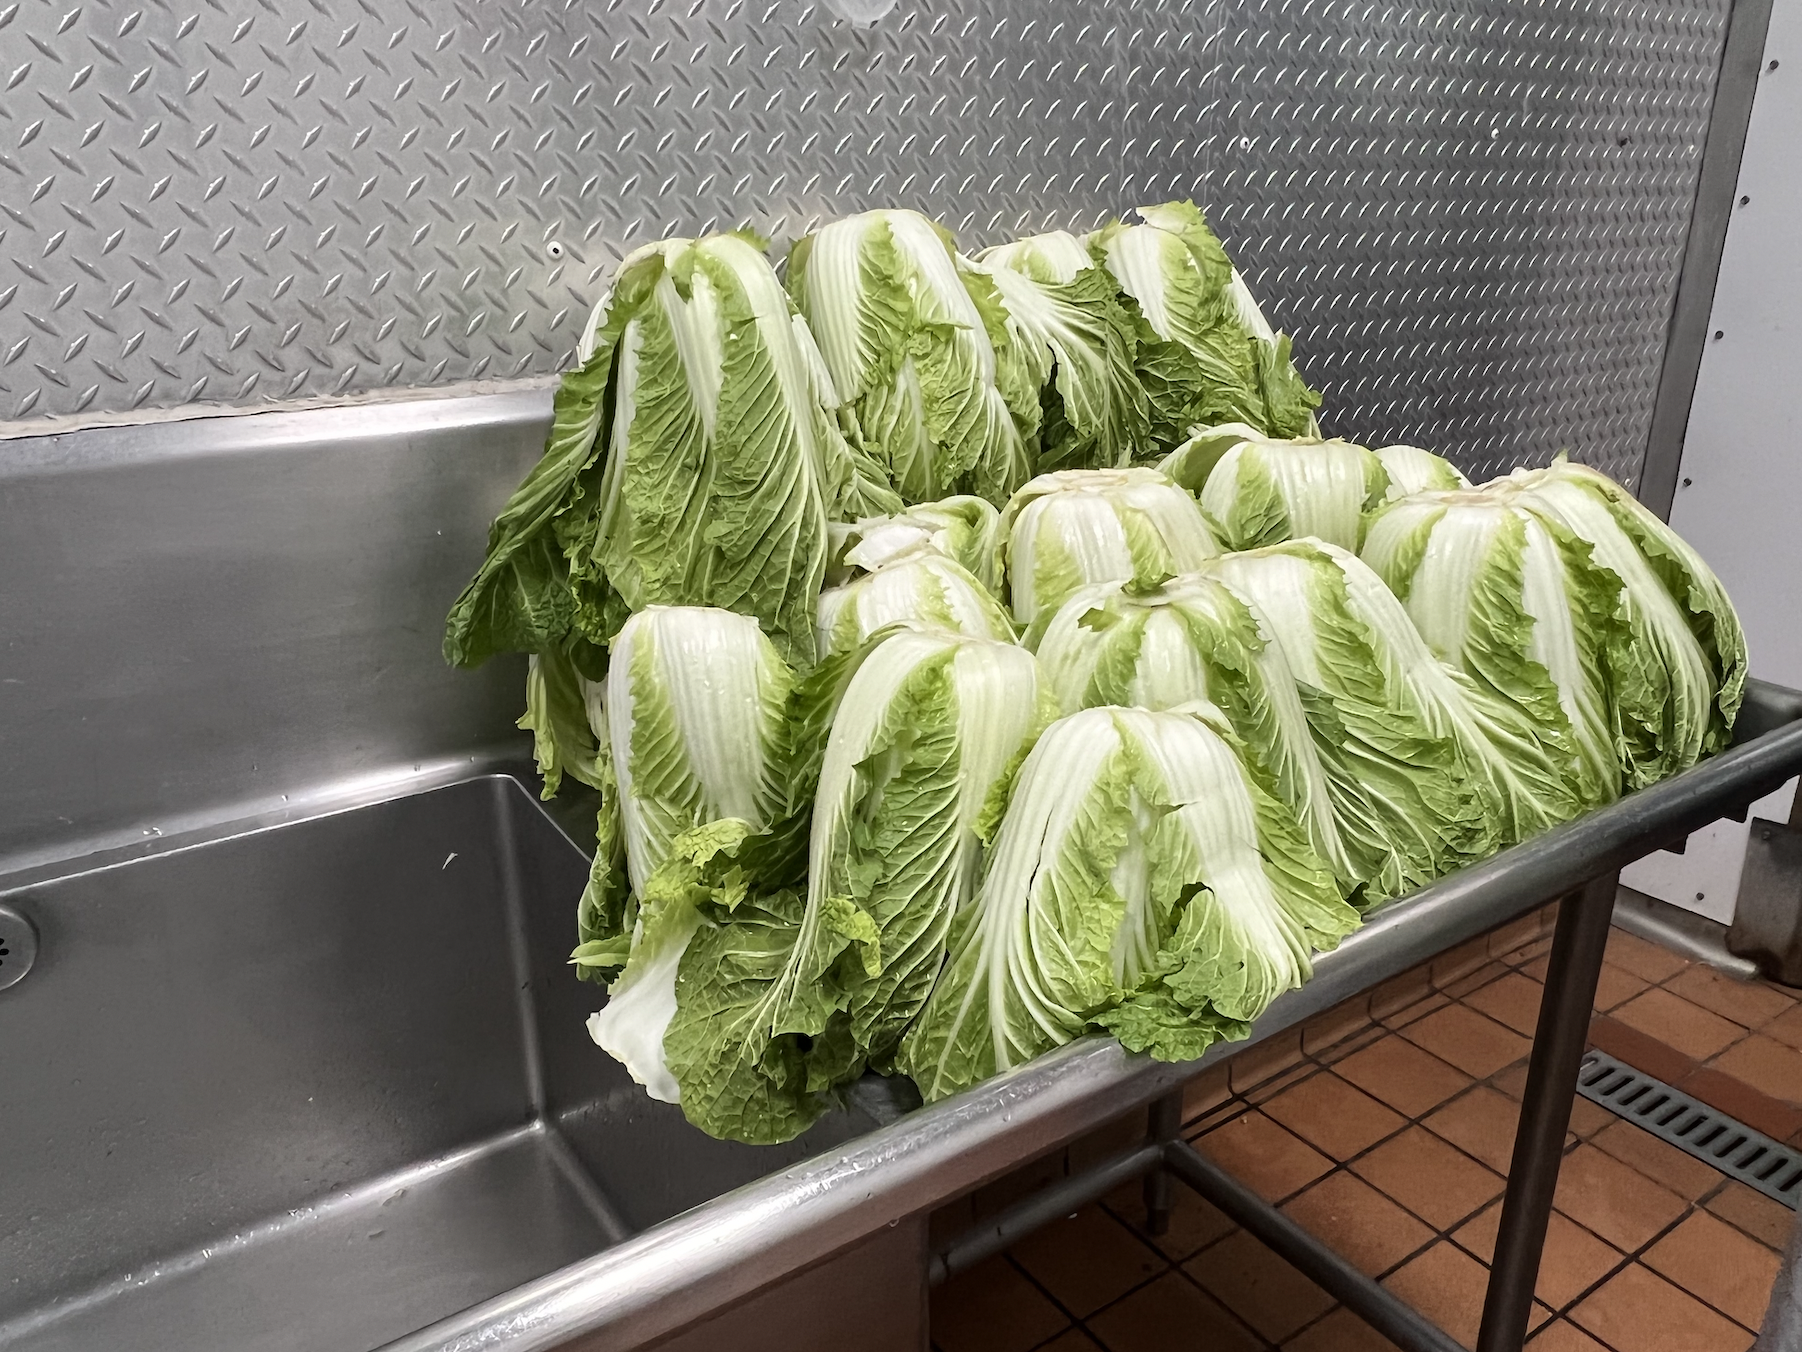 There are employees specifically tasked with washing produce.